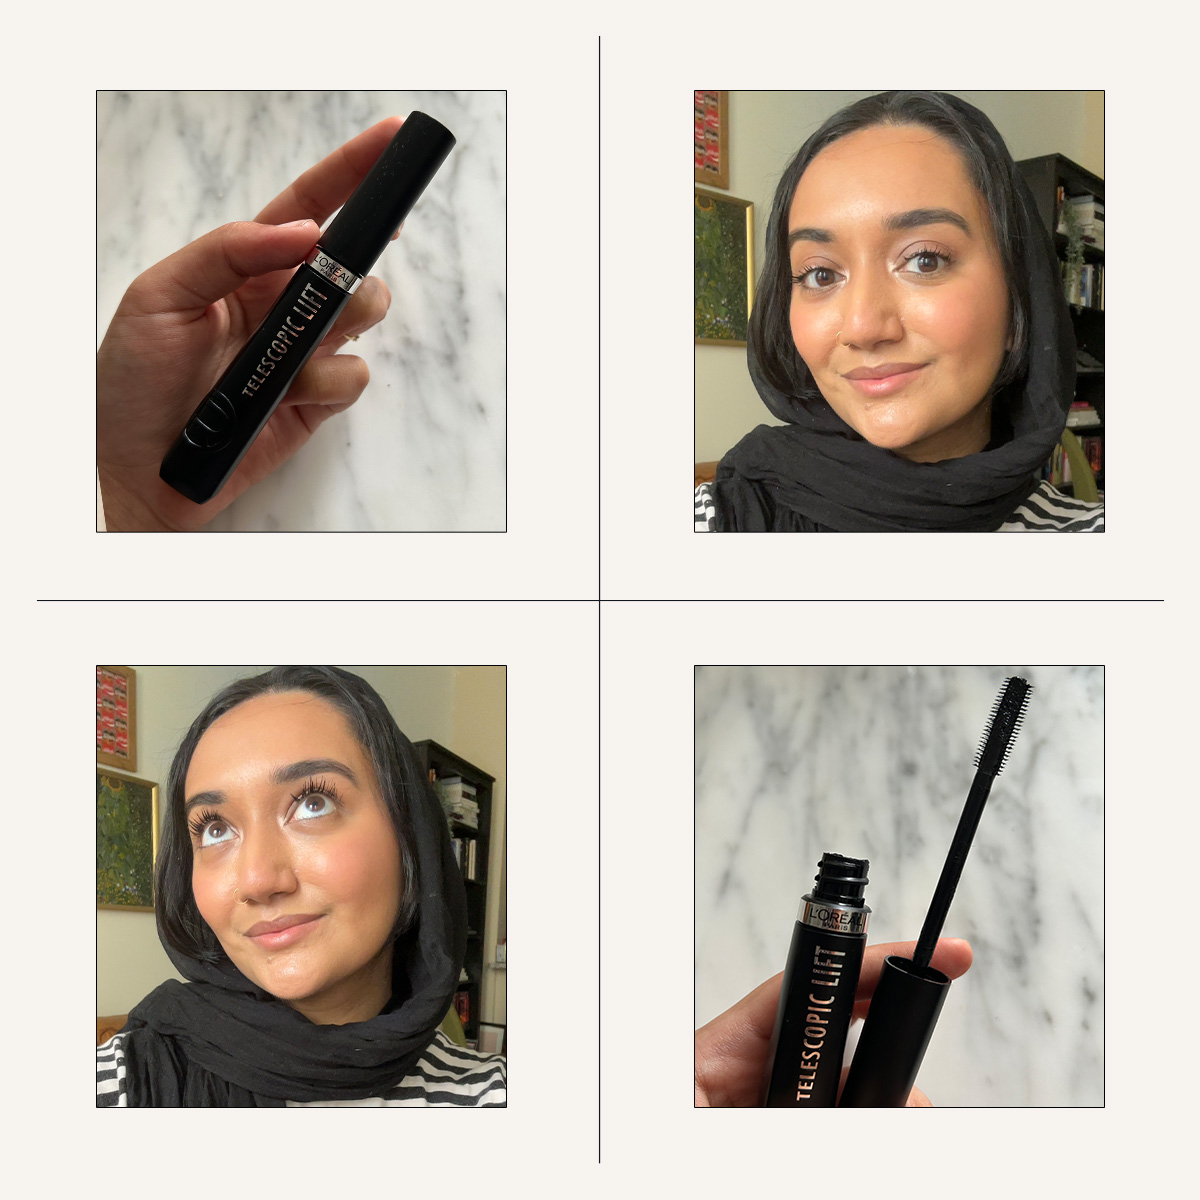 I Tried the $15 Drugstore Mascara That Is All Over TikTok | Who What Wear